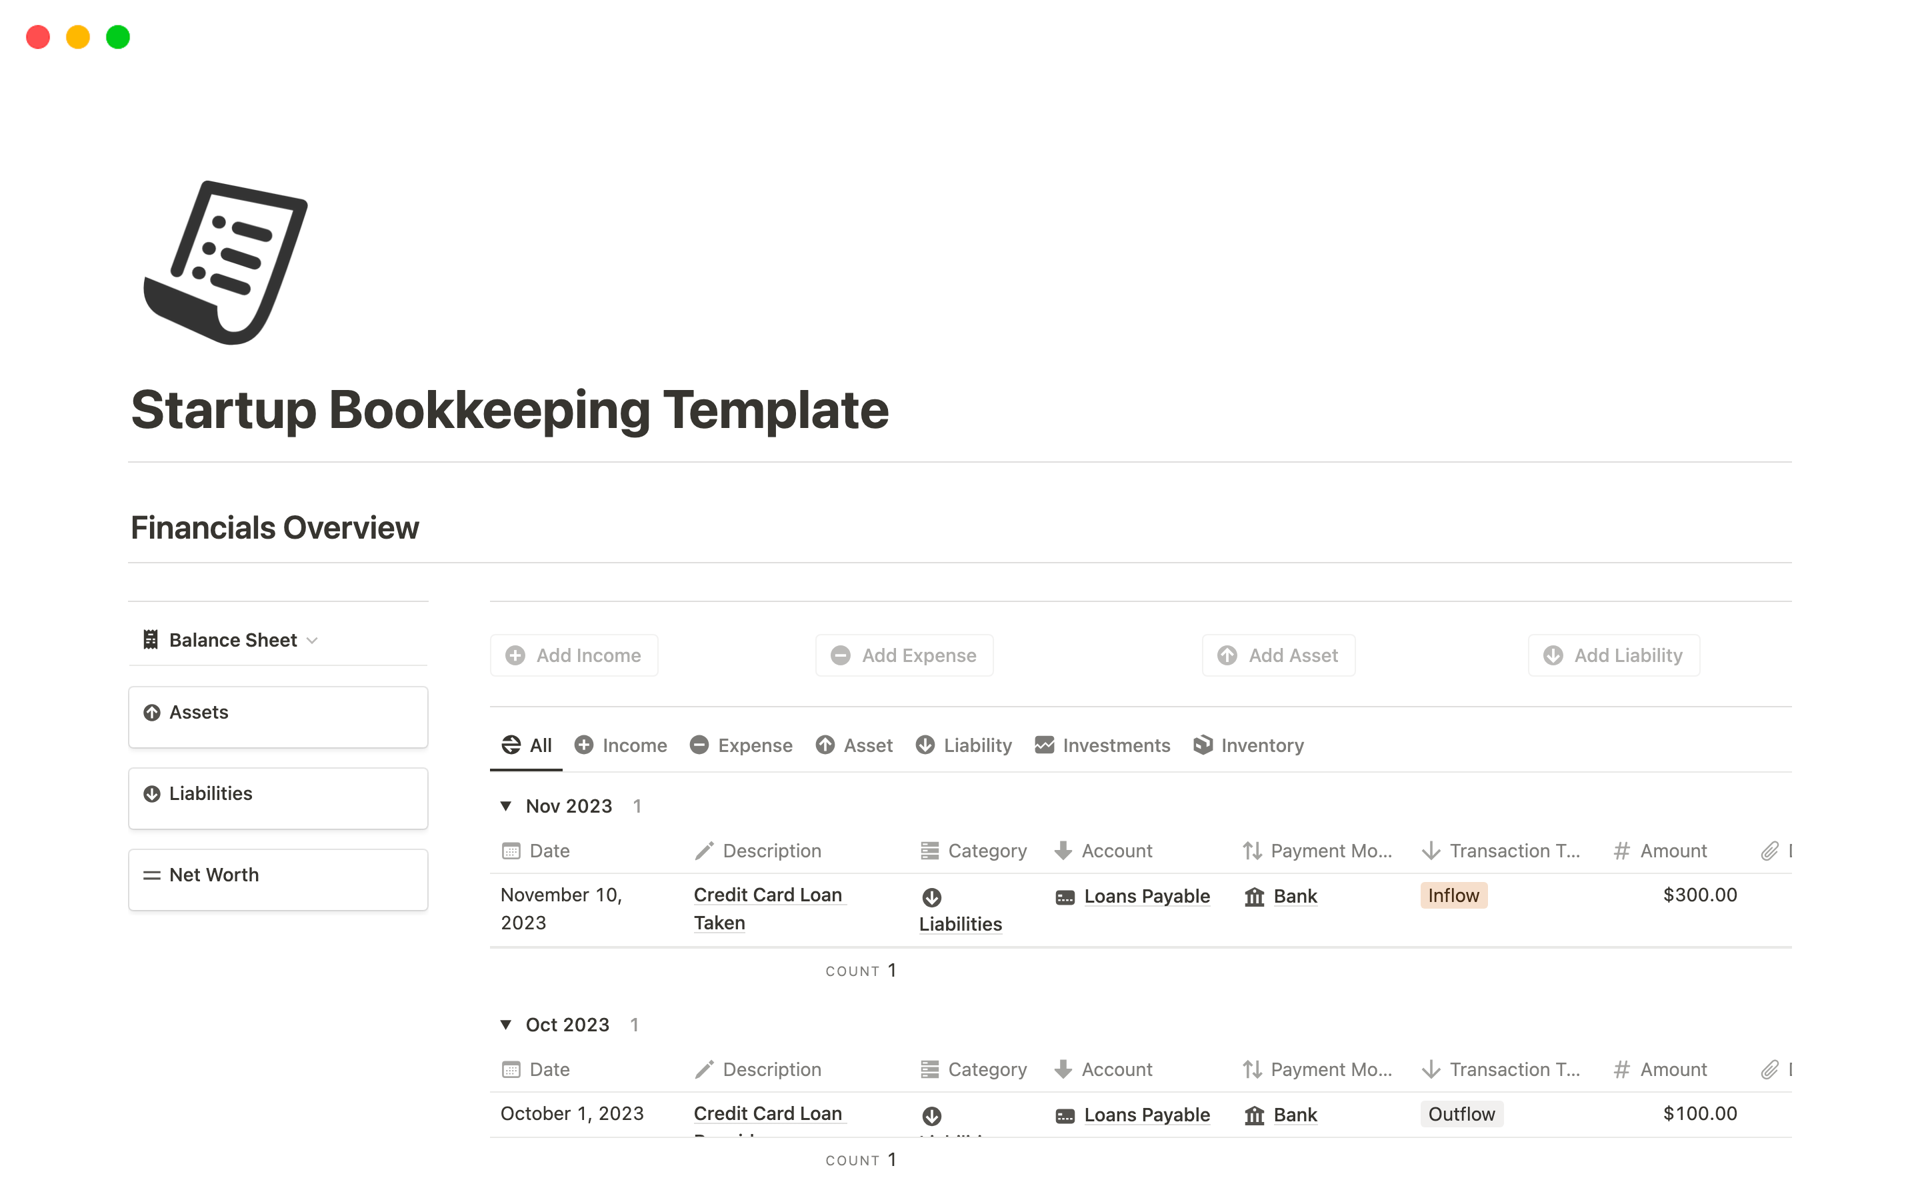 This startup bookkeeping template is a simple Notion template designed to help new businesses keep track of their money, showing where it comes from and where it goes.